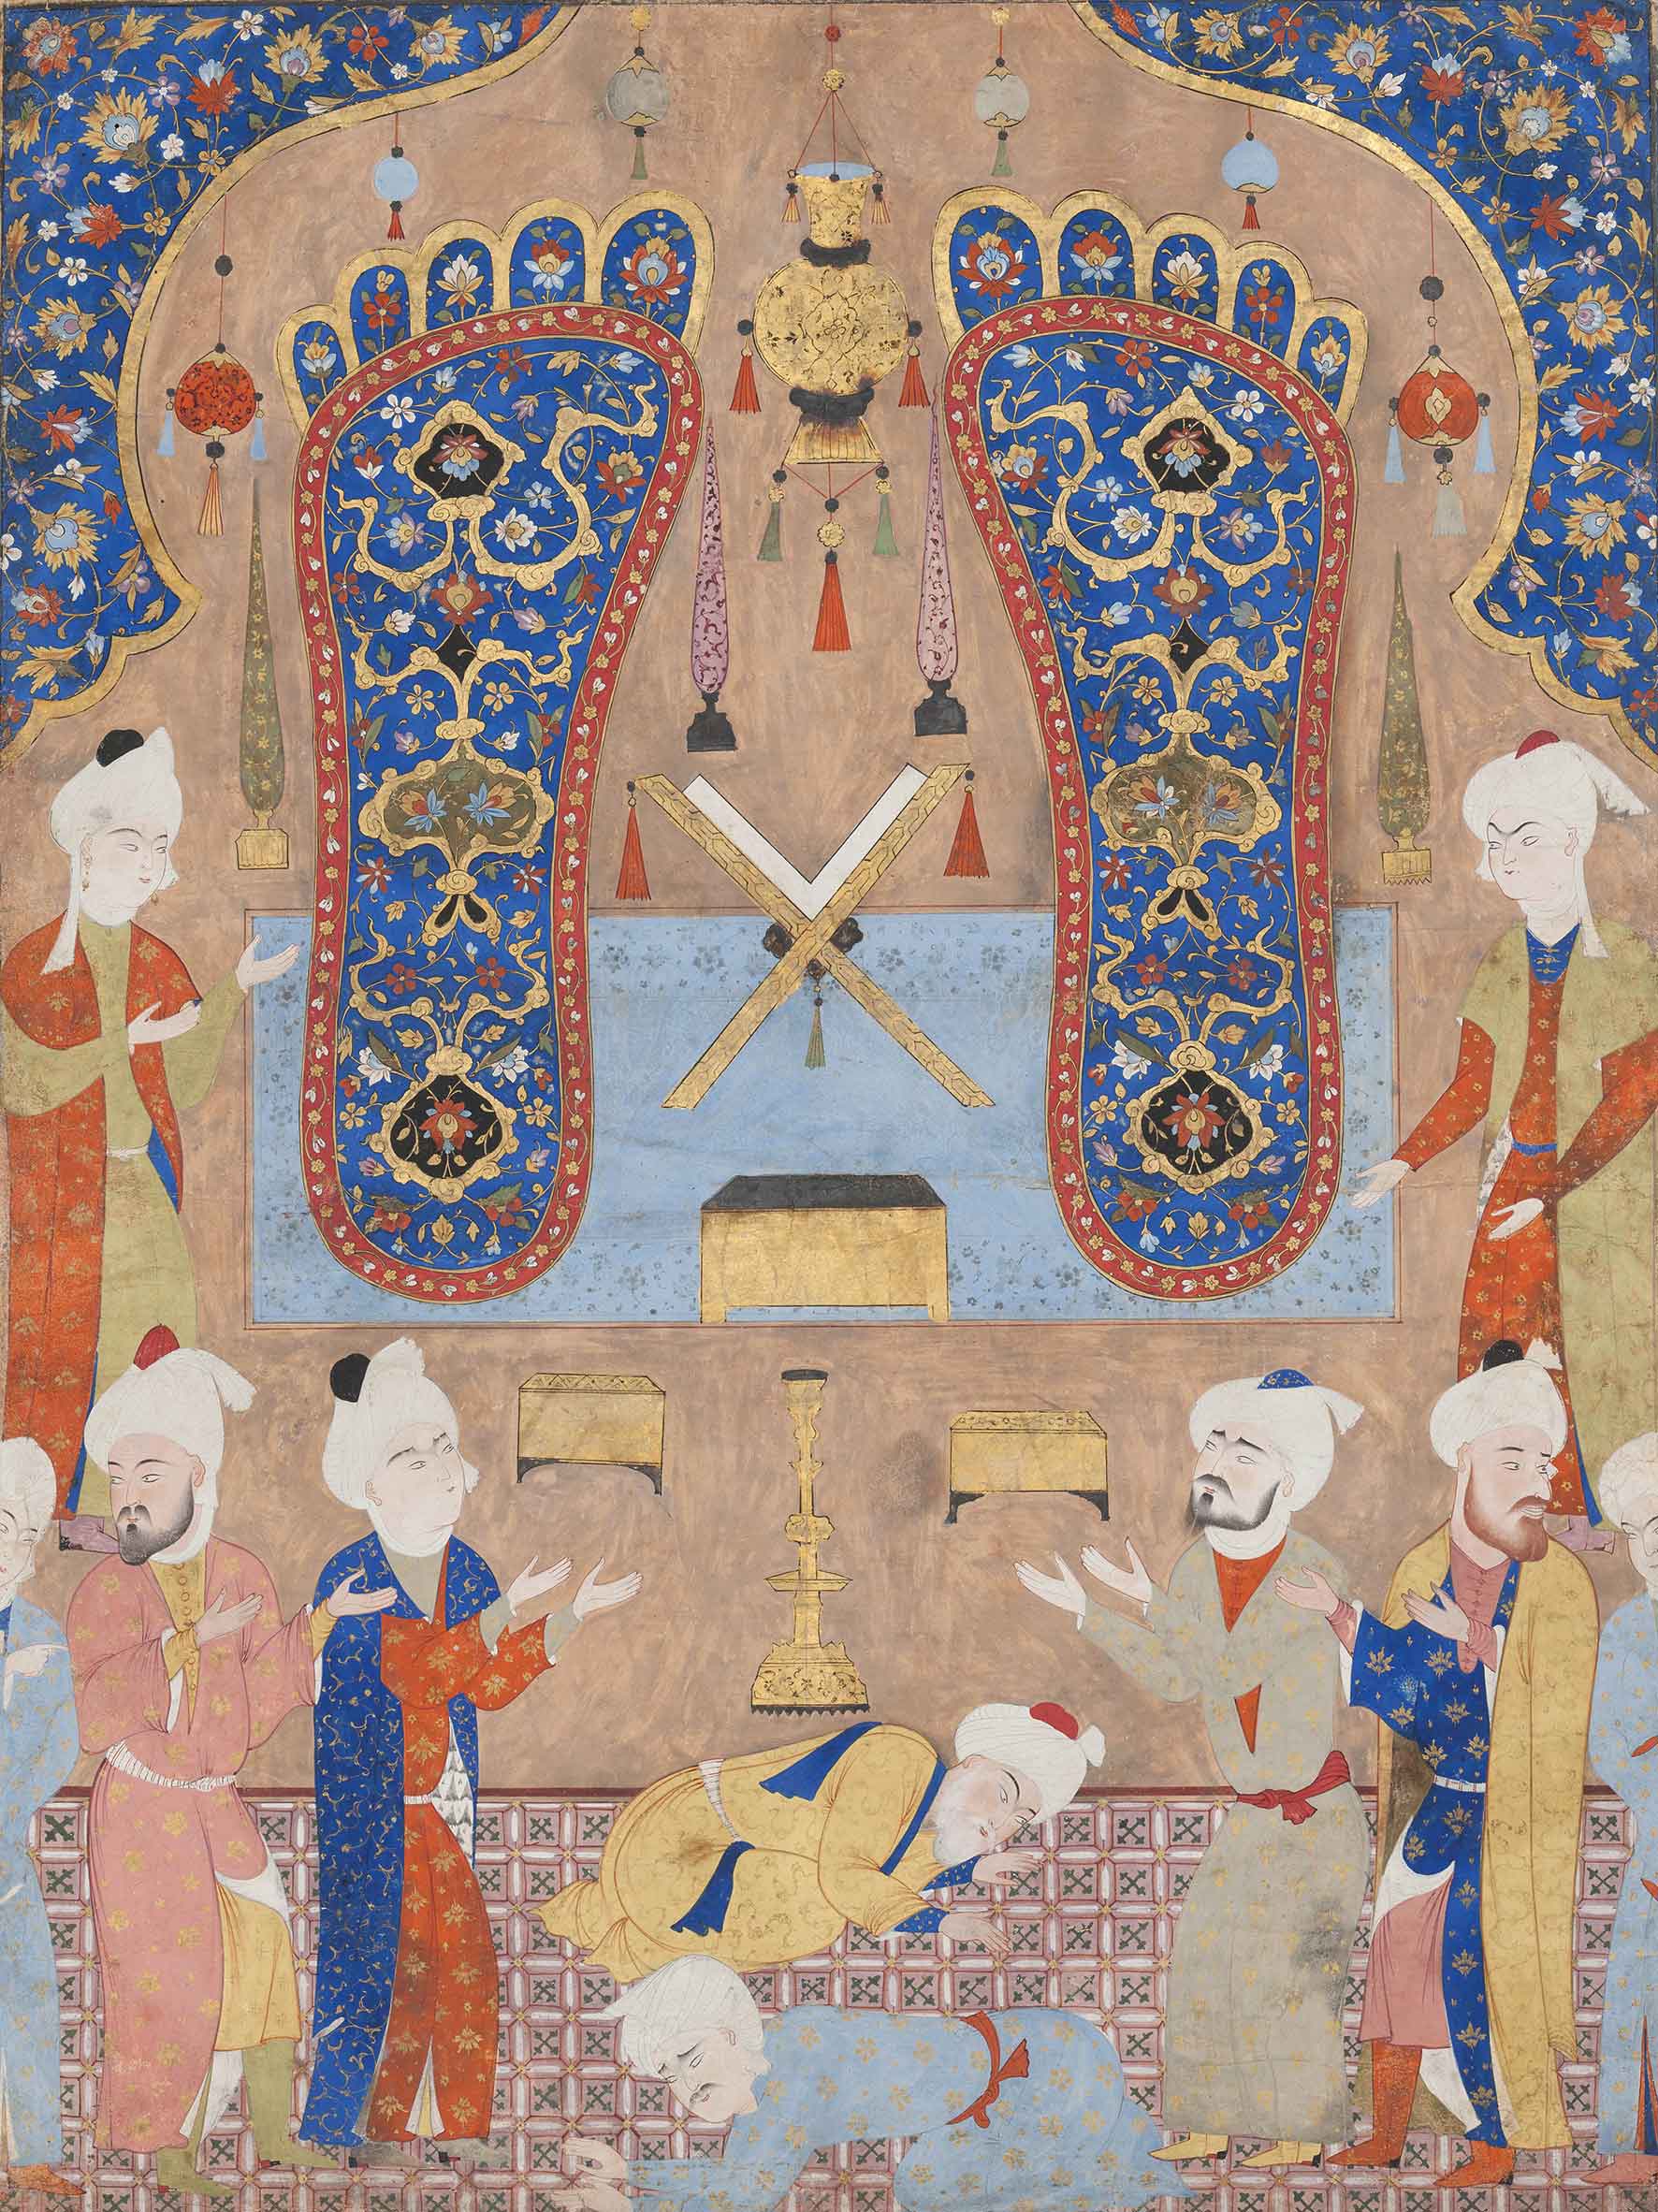 Scene in a mosque, from the Falnama (Book of Omens) of Shah Tahmasp I, Iran, 1550/1560, colours and gold on paper, 59 x 44.5 cm, MAH Musée d’art et d’histoire, Ville de Genève, Legacy Jean Pozzi, 1971. Photo: MAH, André Longchamp. Figurative imagery in Islamic art